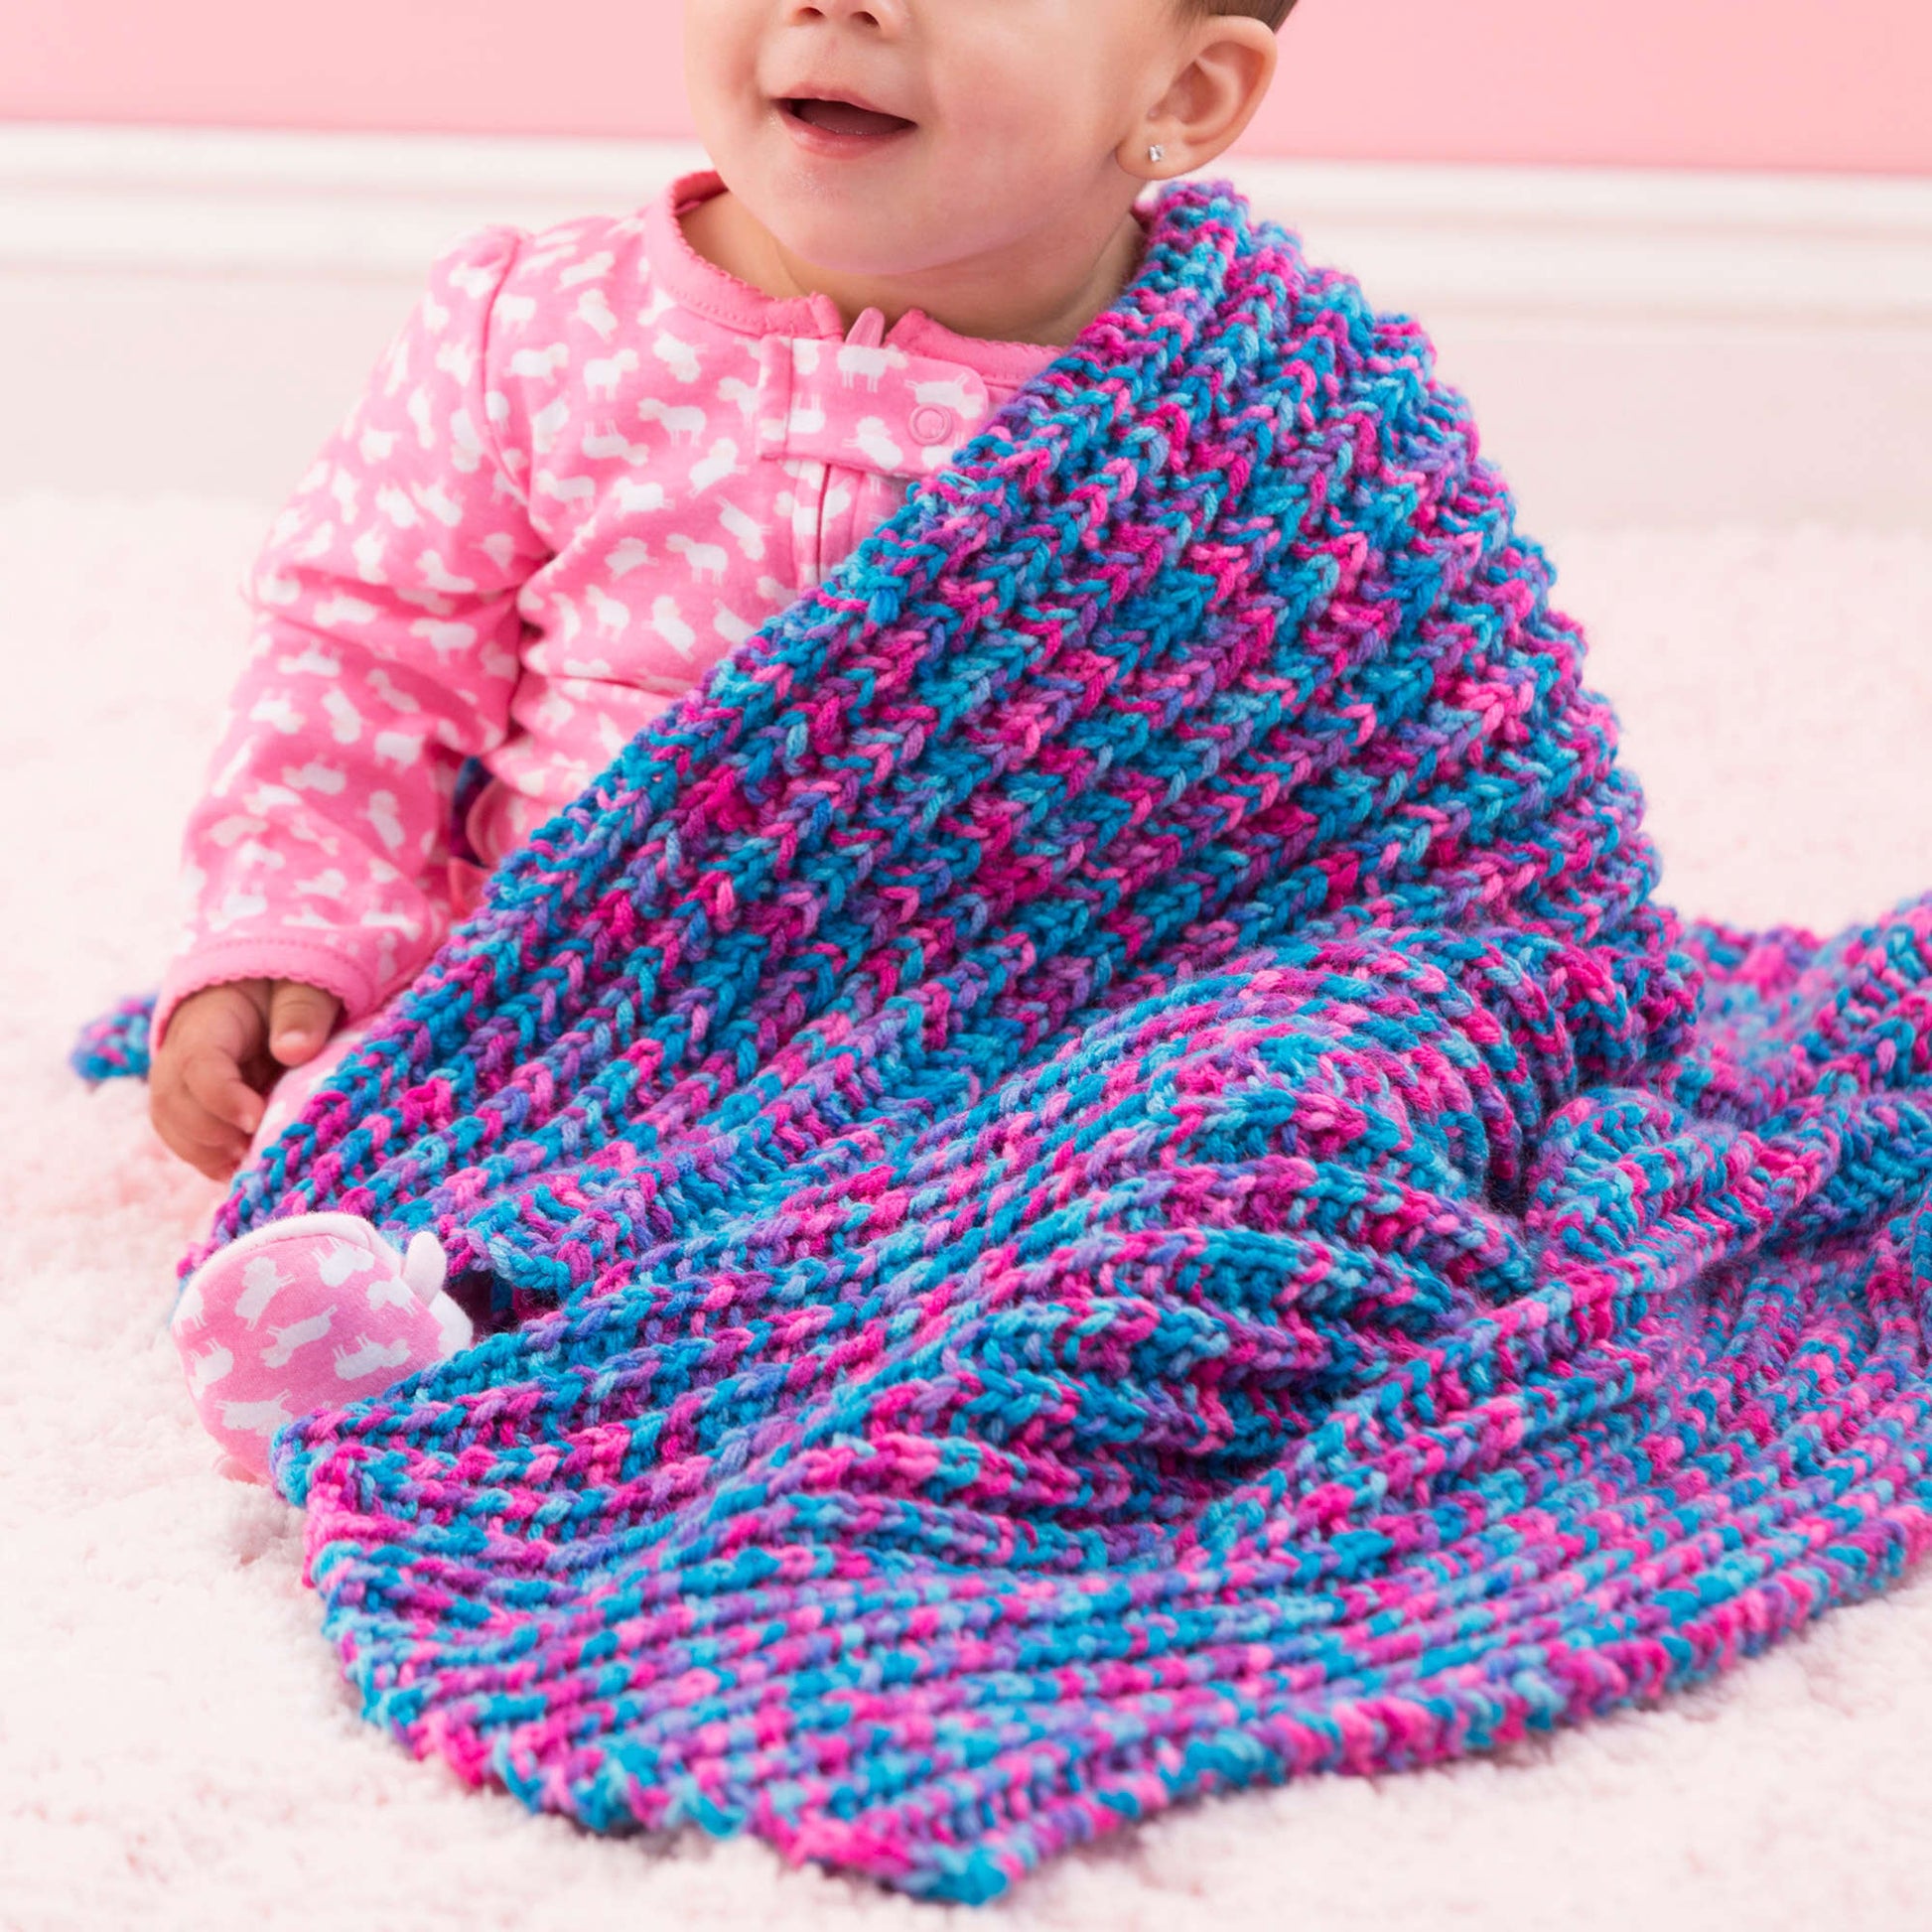 Red Heart One-Row Knit Baby Blanket Pattern